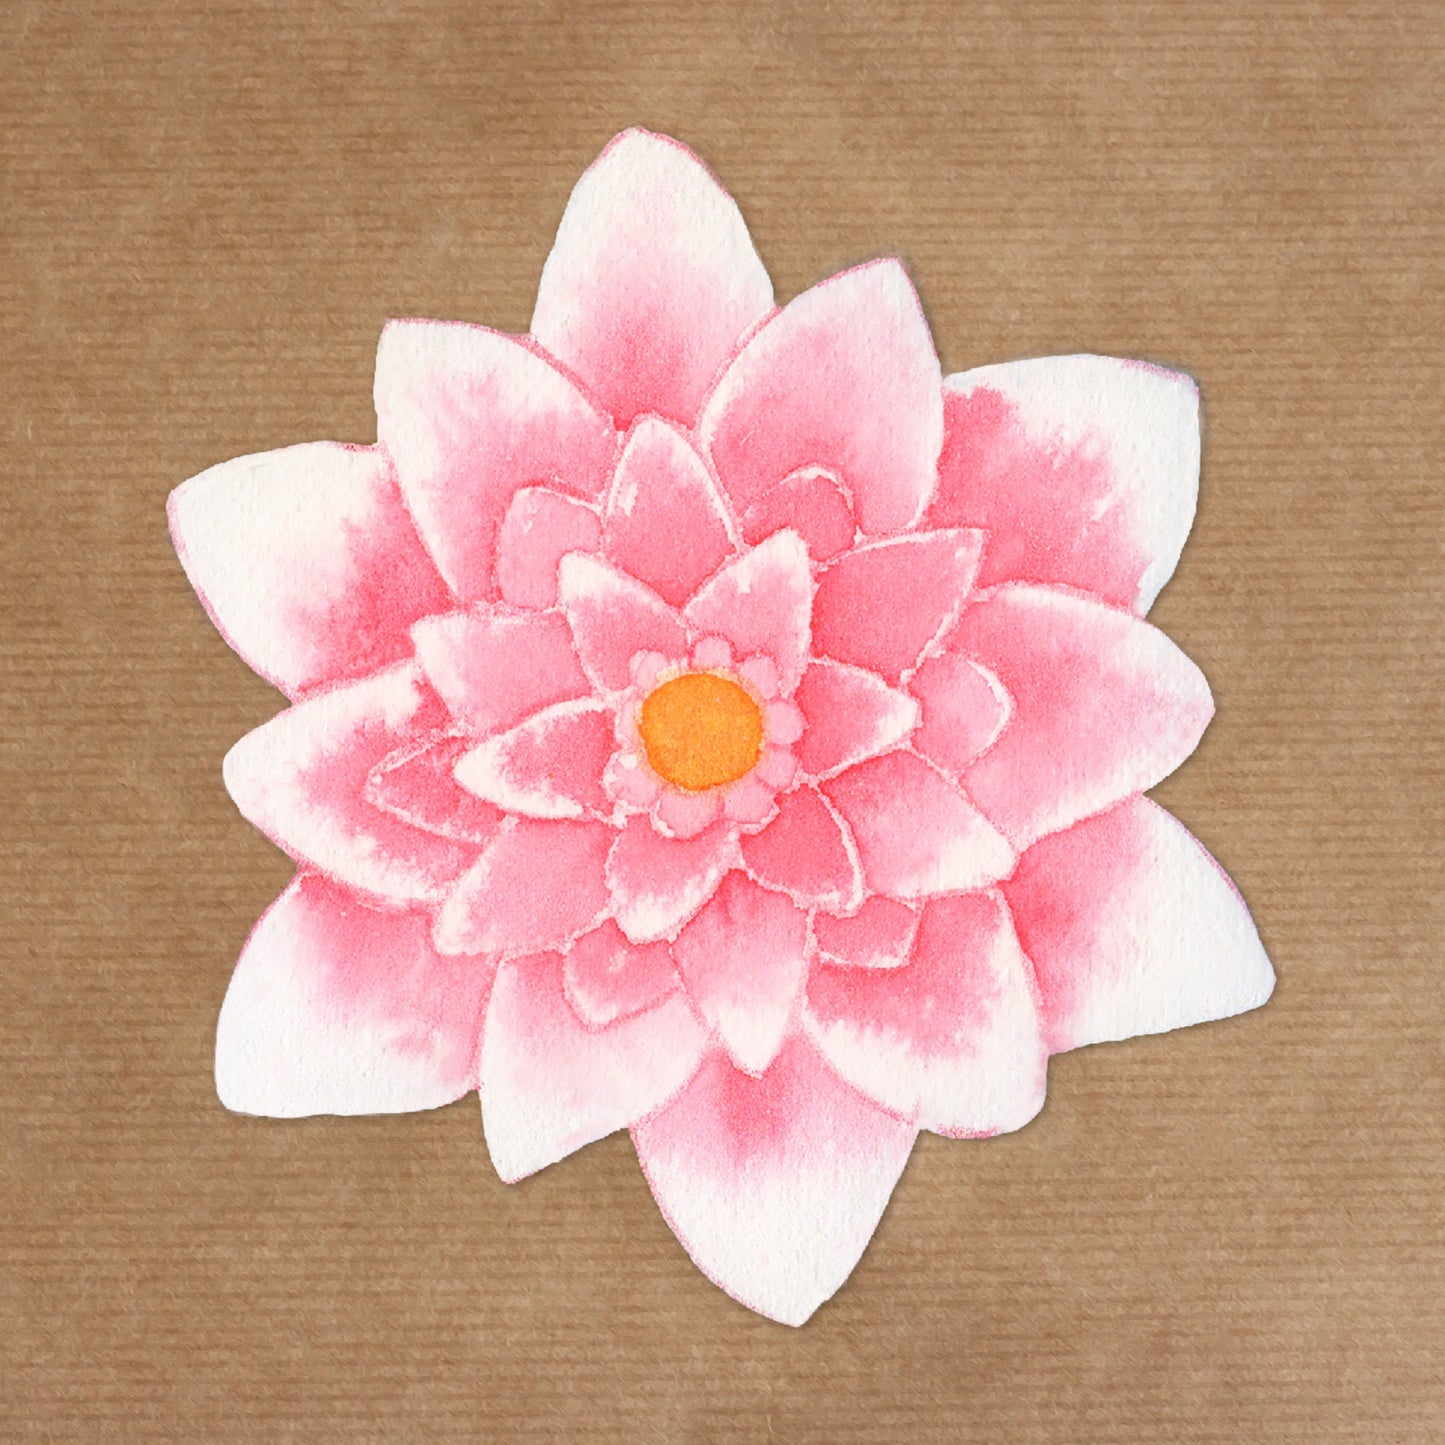 Sticker 'Waterlily', 3 pieces, transparent approx. 5x5cm water lily in watercolor